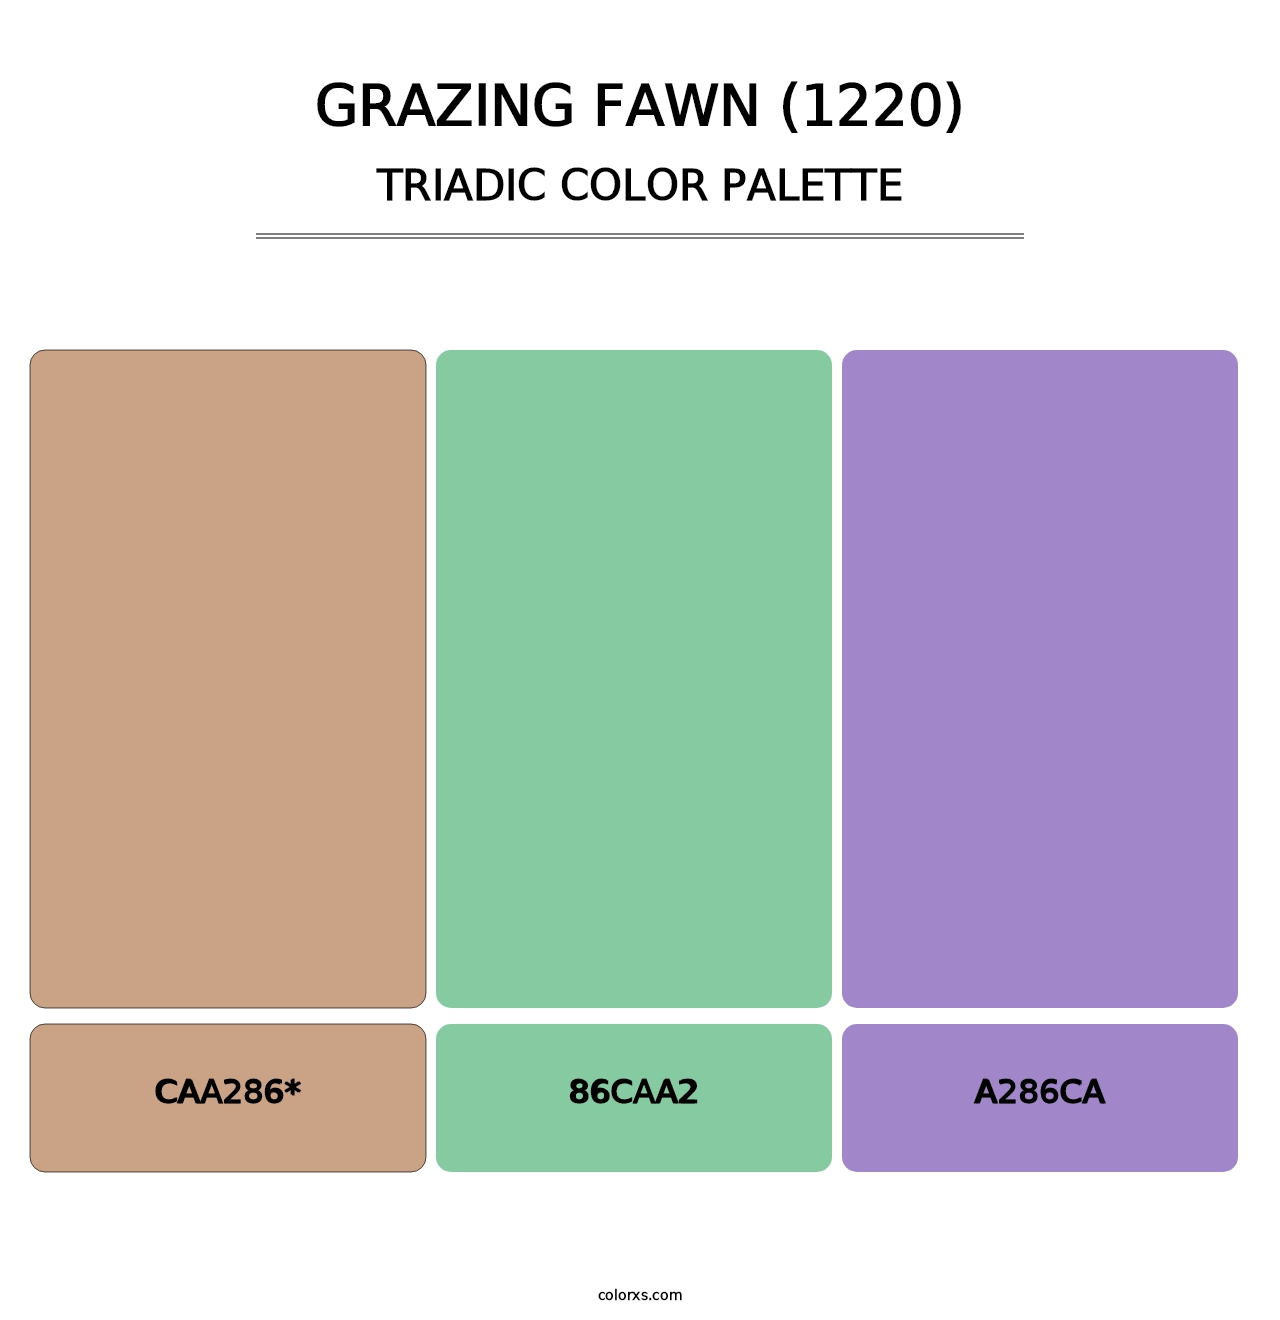 Grazing Fawn (1220) - Triadic Color Palette